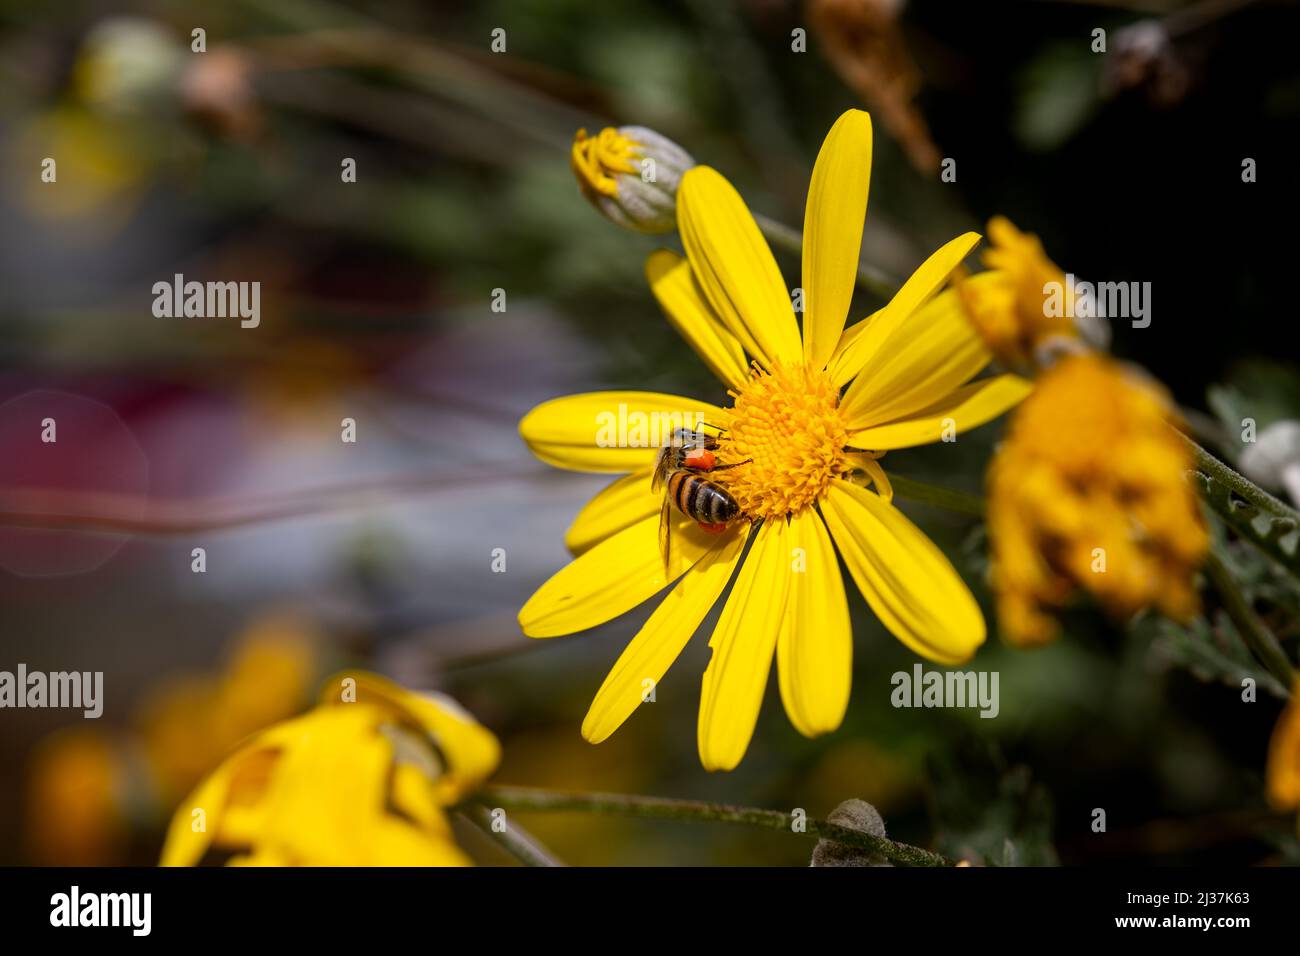 Yellow flower and worker honey bee in selective focus. A worker bee collecting pollen and nectar from a yellow flower. Stock Photo